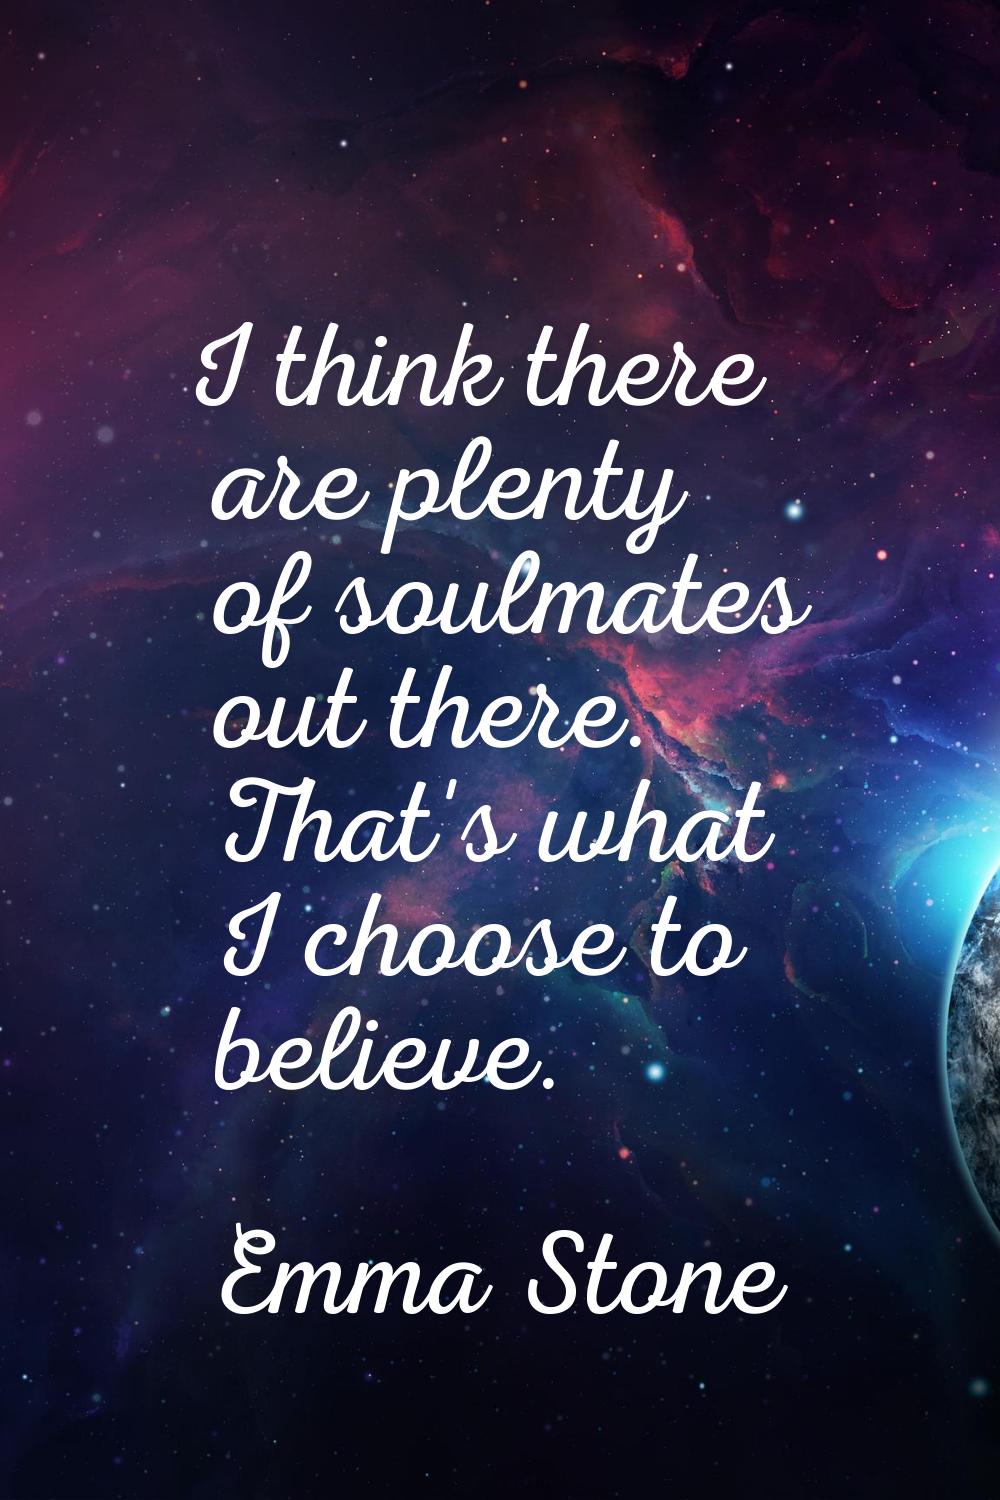 I think there are plenty of soulmates out there. That's what I choose to believe.